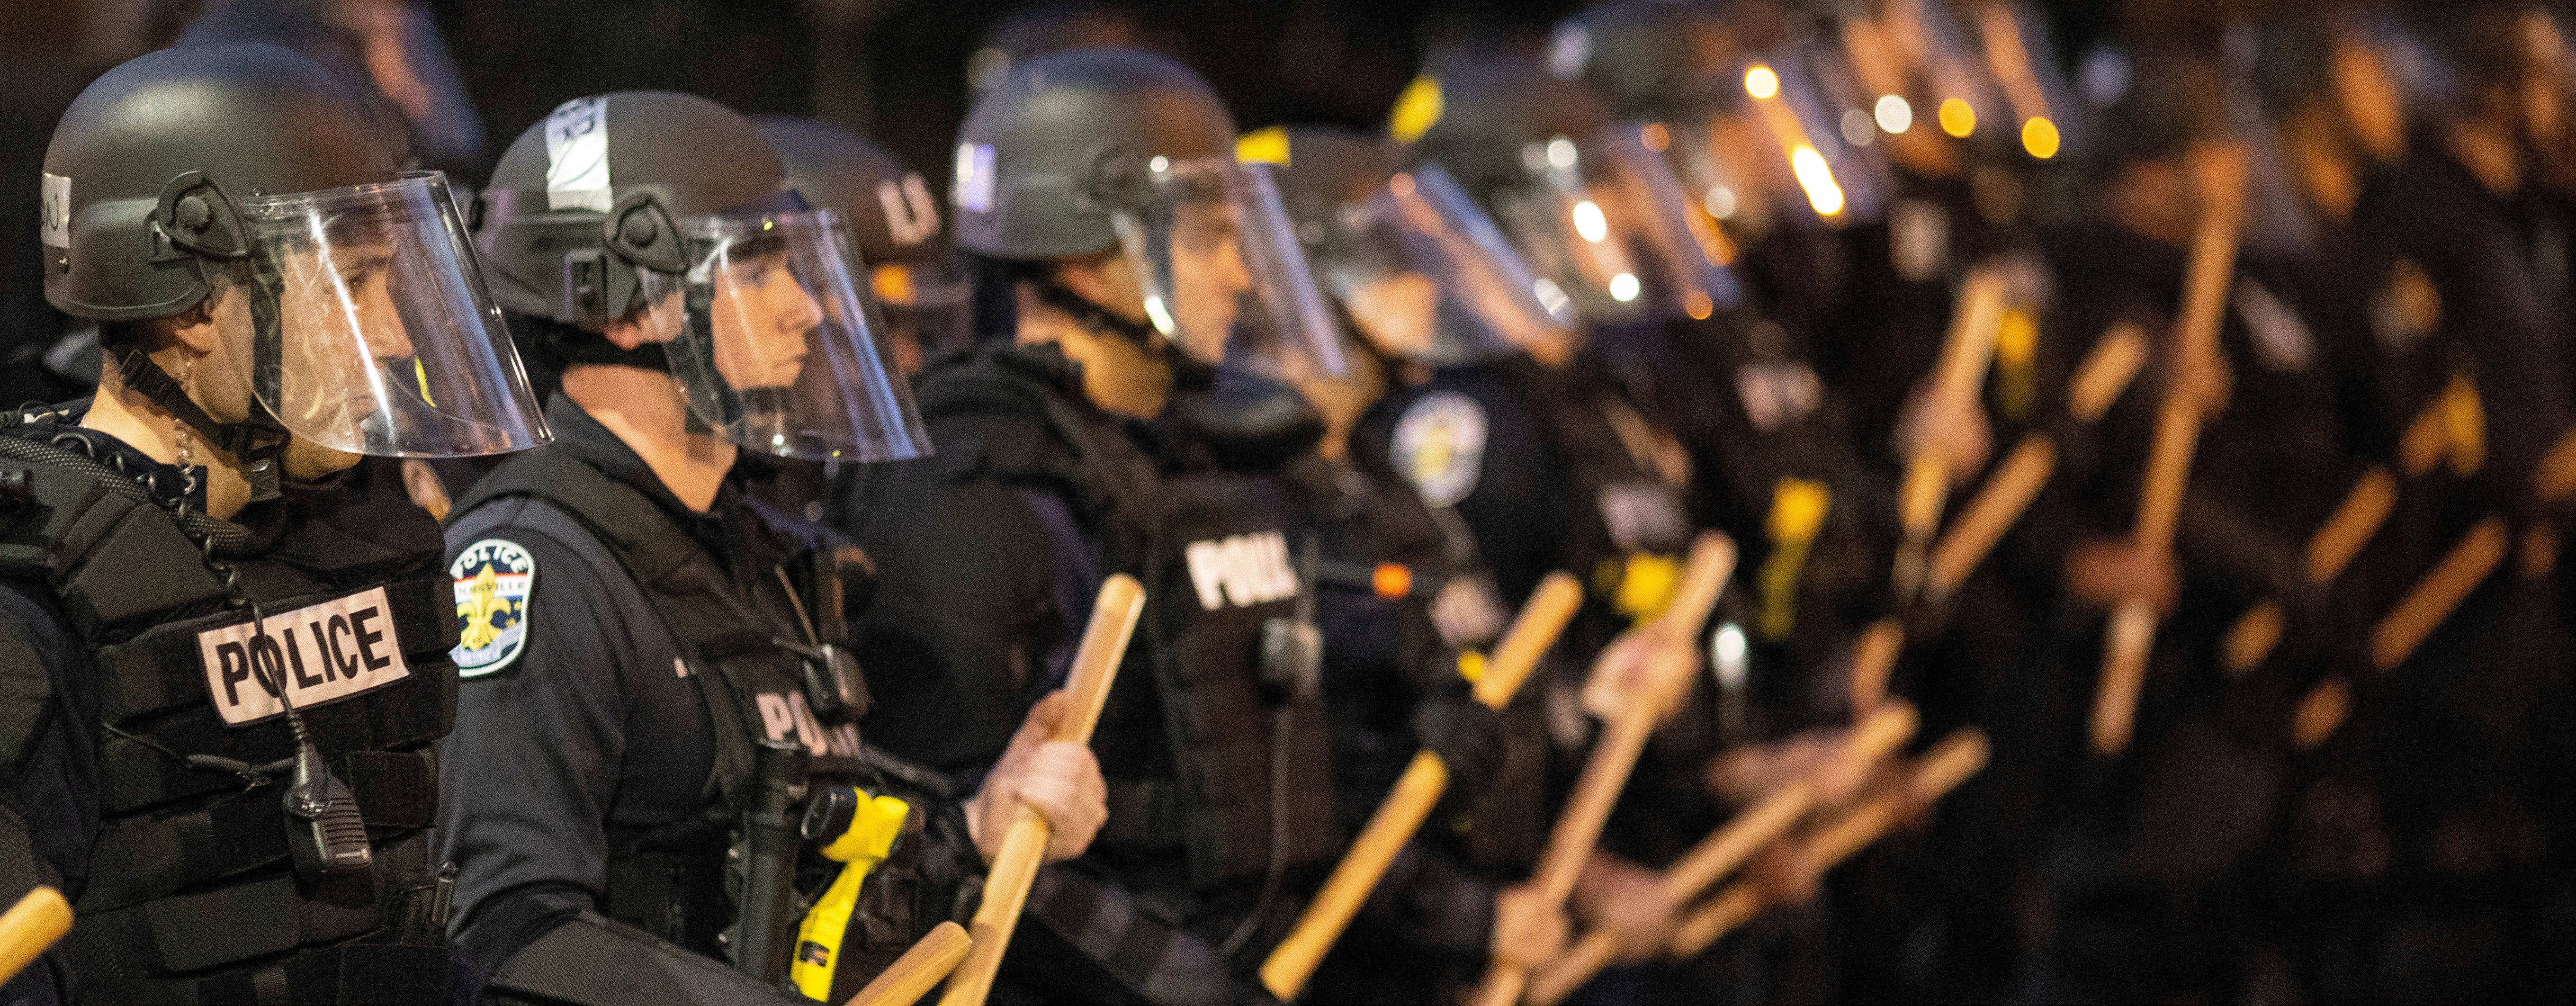 This Is How Much Major Cities Spend on Police Versus Everything